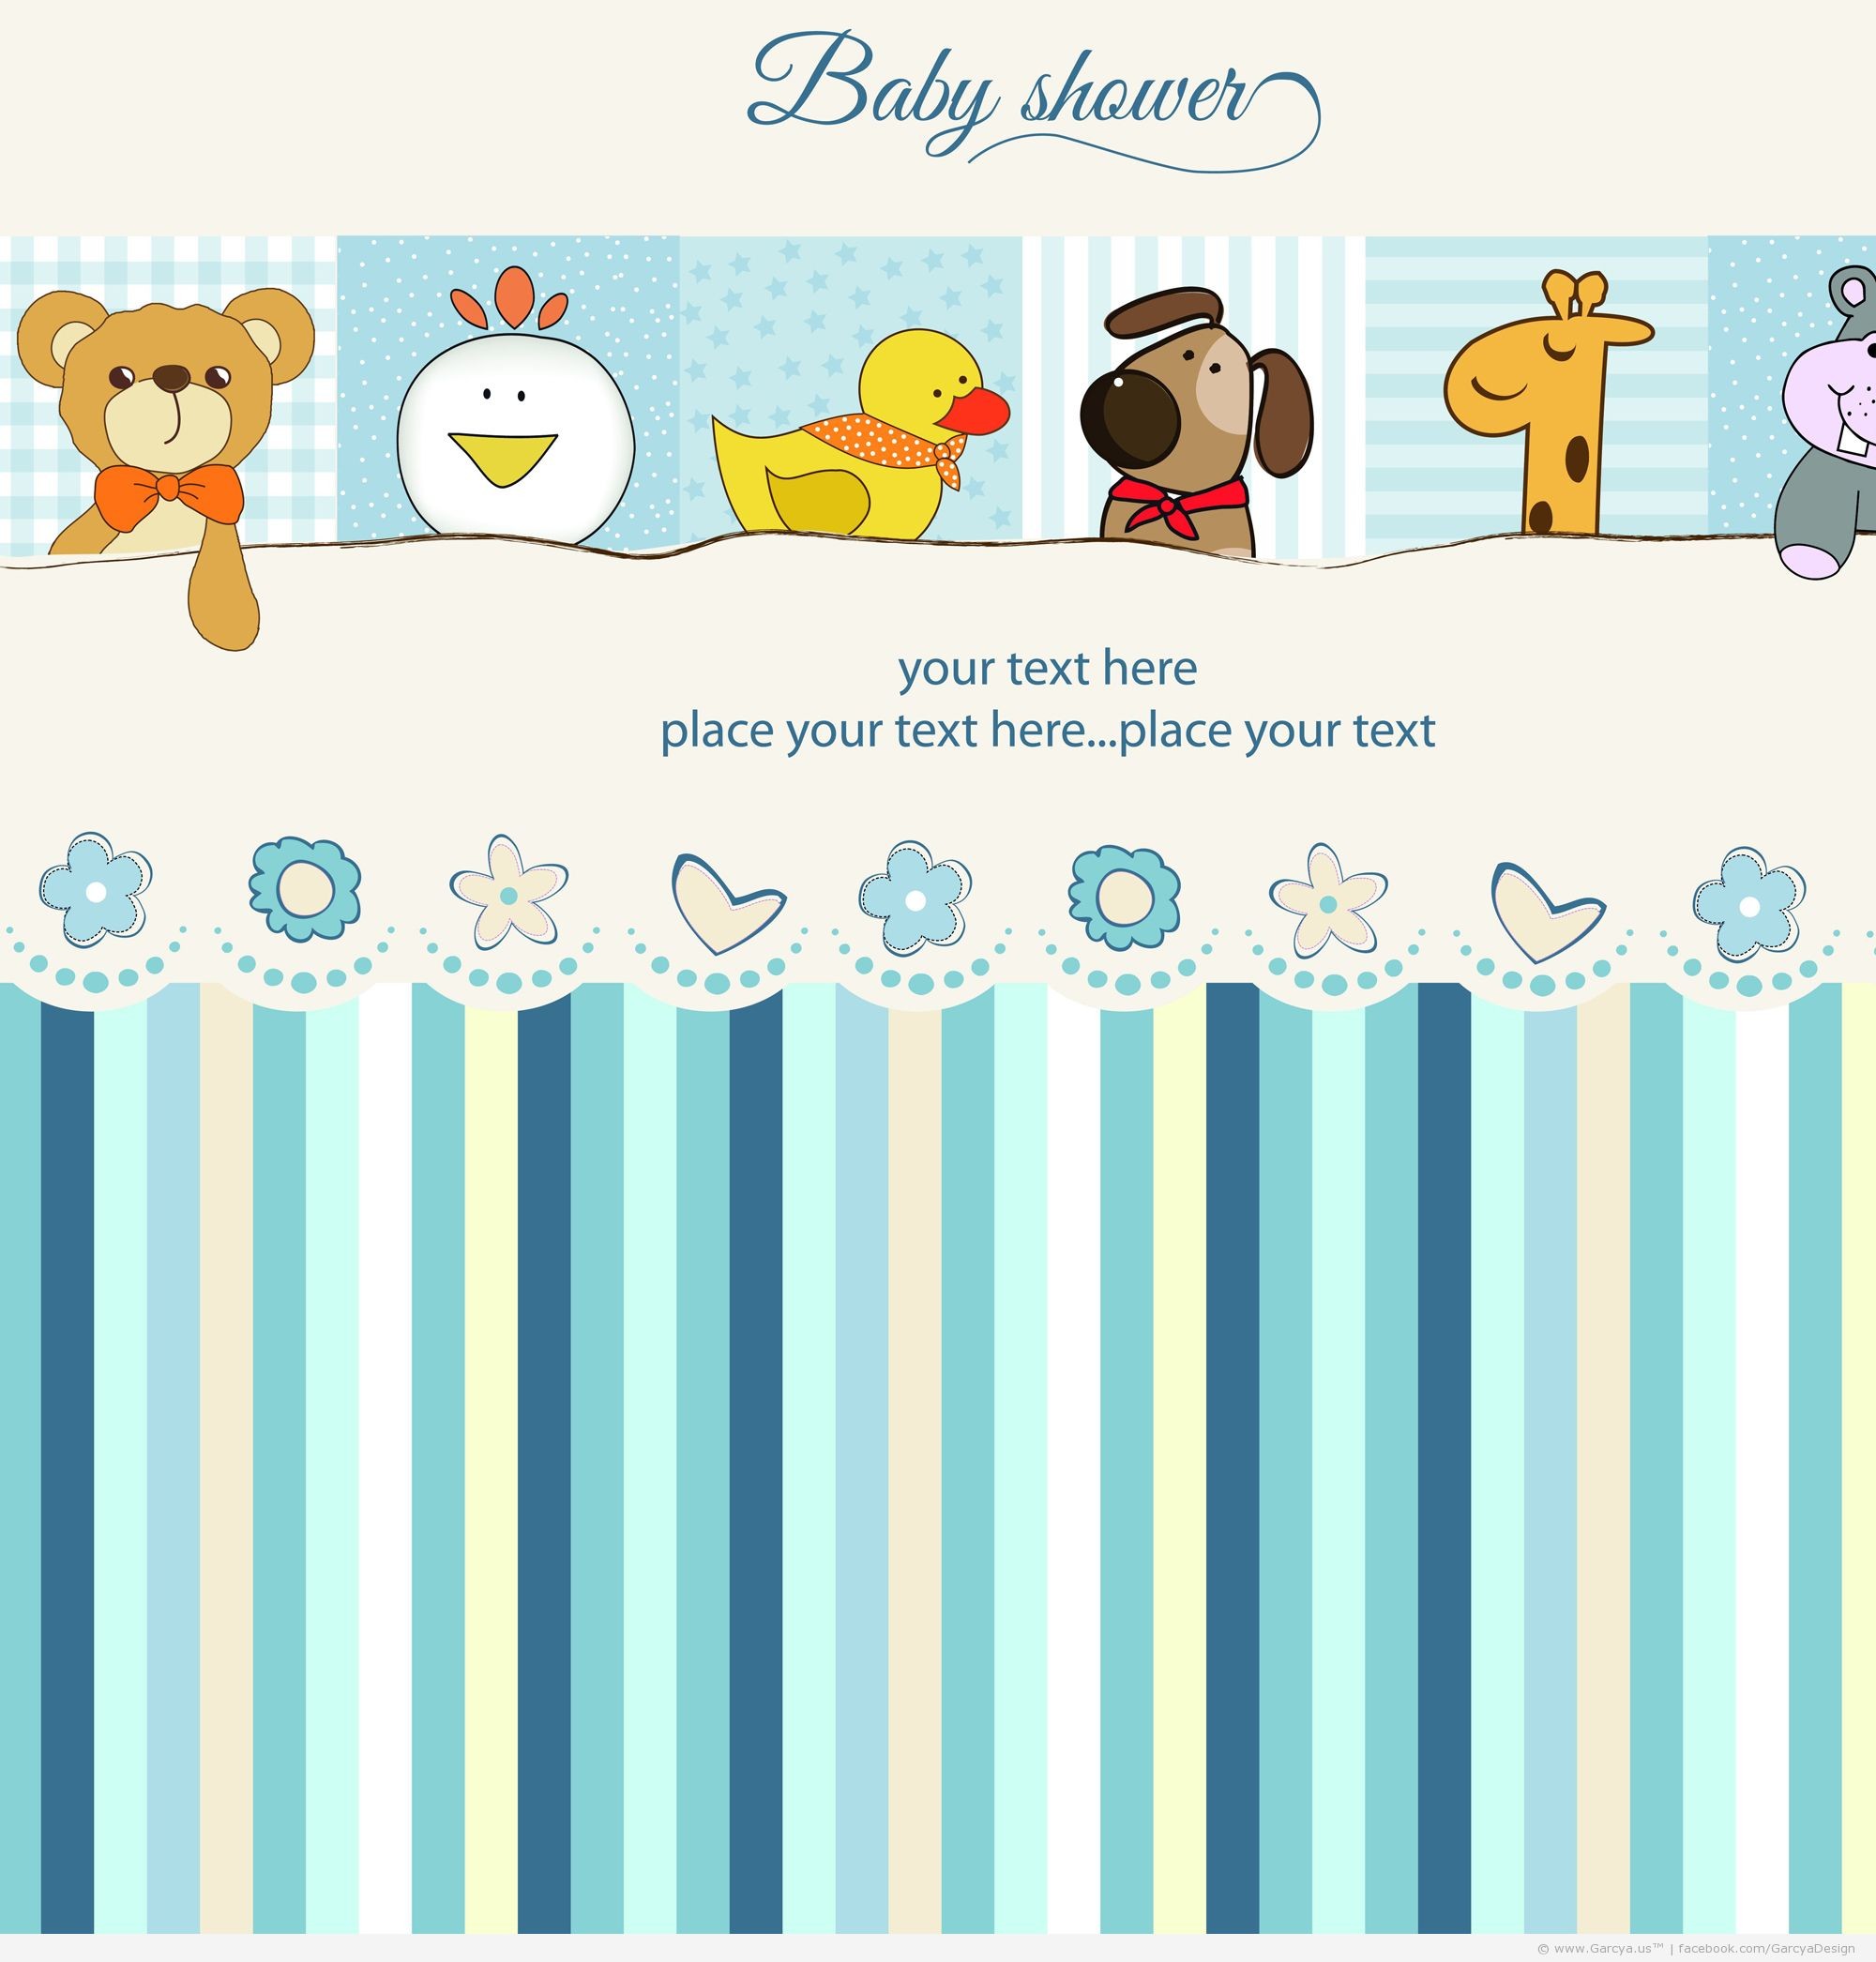 2000x2092 ... Baby theme background Vector Image - 1314907 | StockUnlimited ...